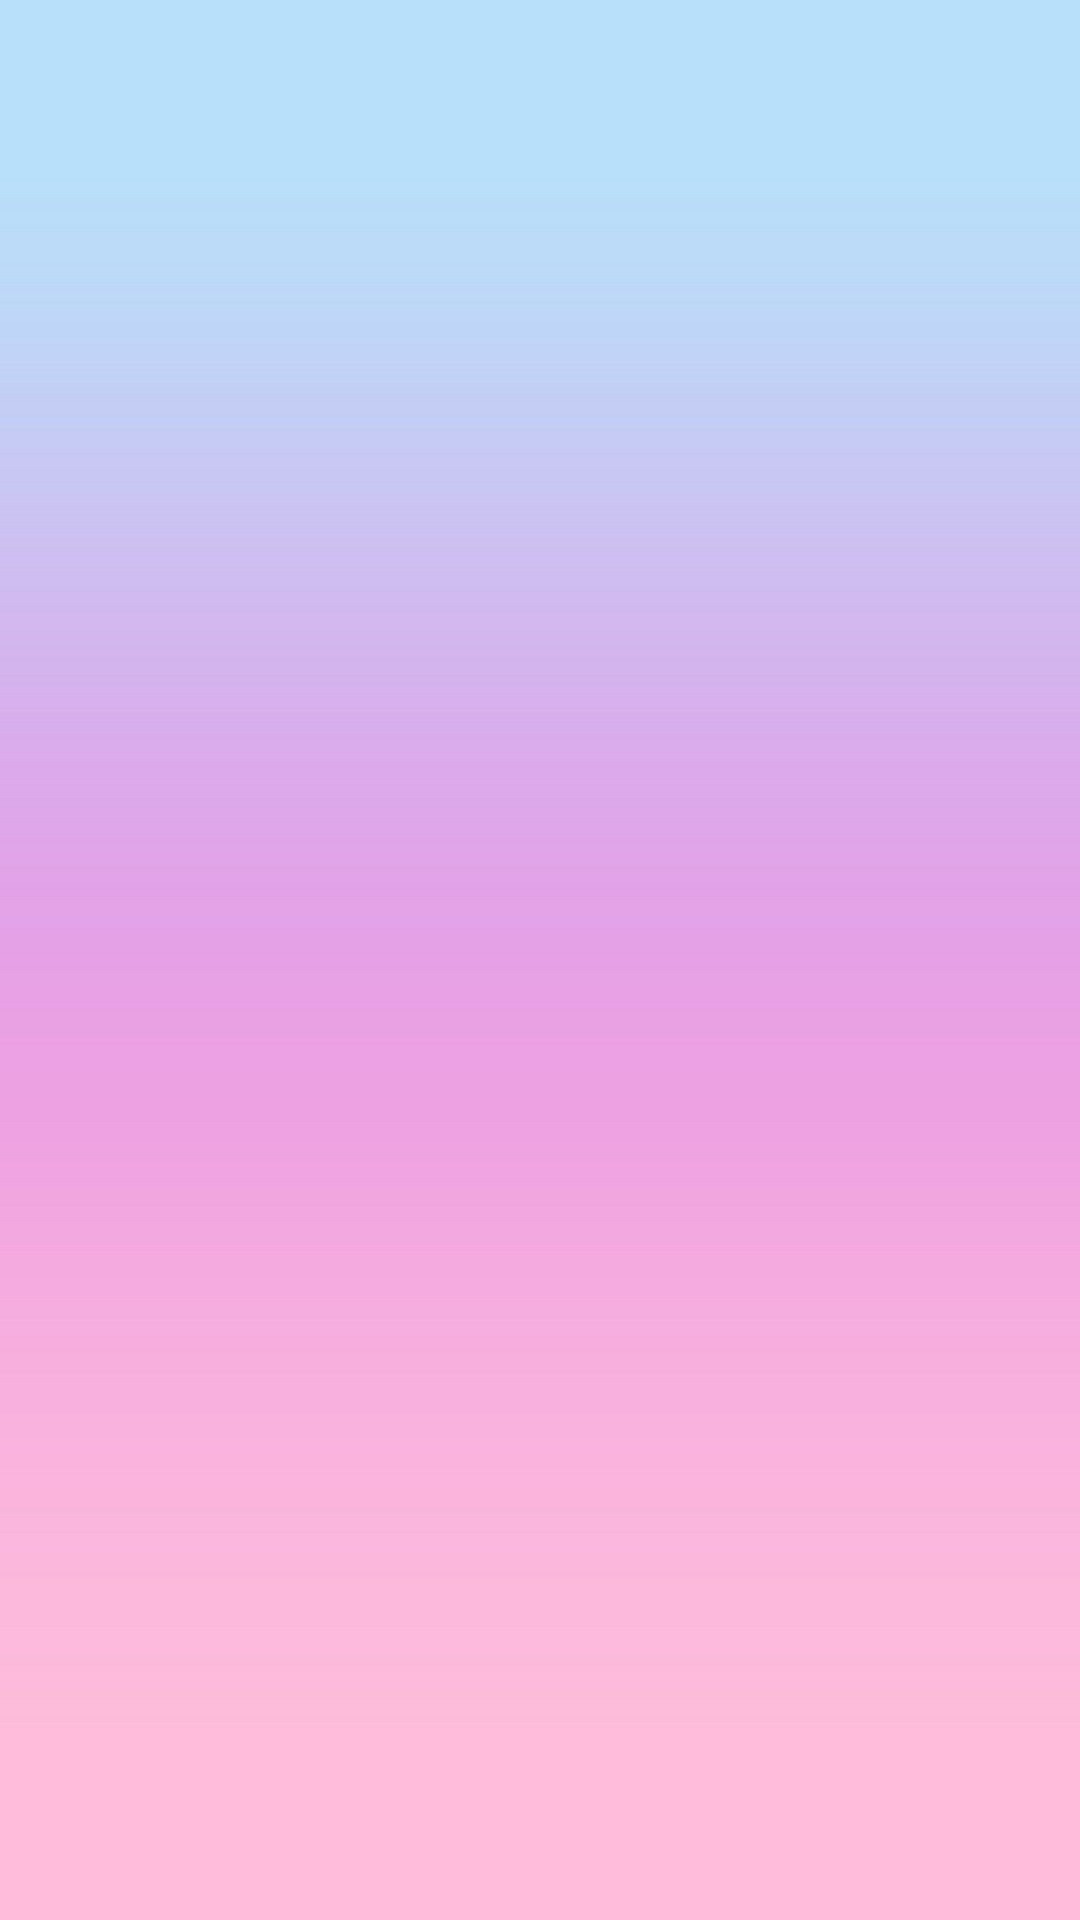 Gradient iPhone Wallpaper Lock Screen With high-resolution 1080X1920 pixel. You can set as wallpaper for Apple iPhone X, XS Max, XR, 8, 7, 6, SE, iPad. Enjoy and share your favorite HD wallpapers and background images